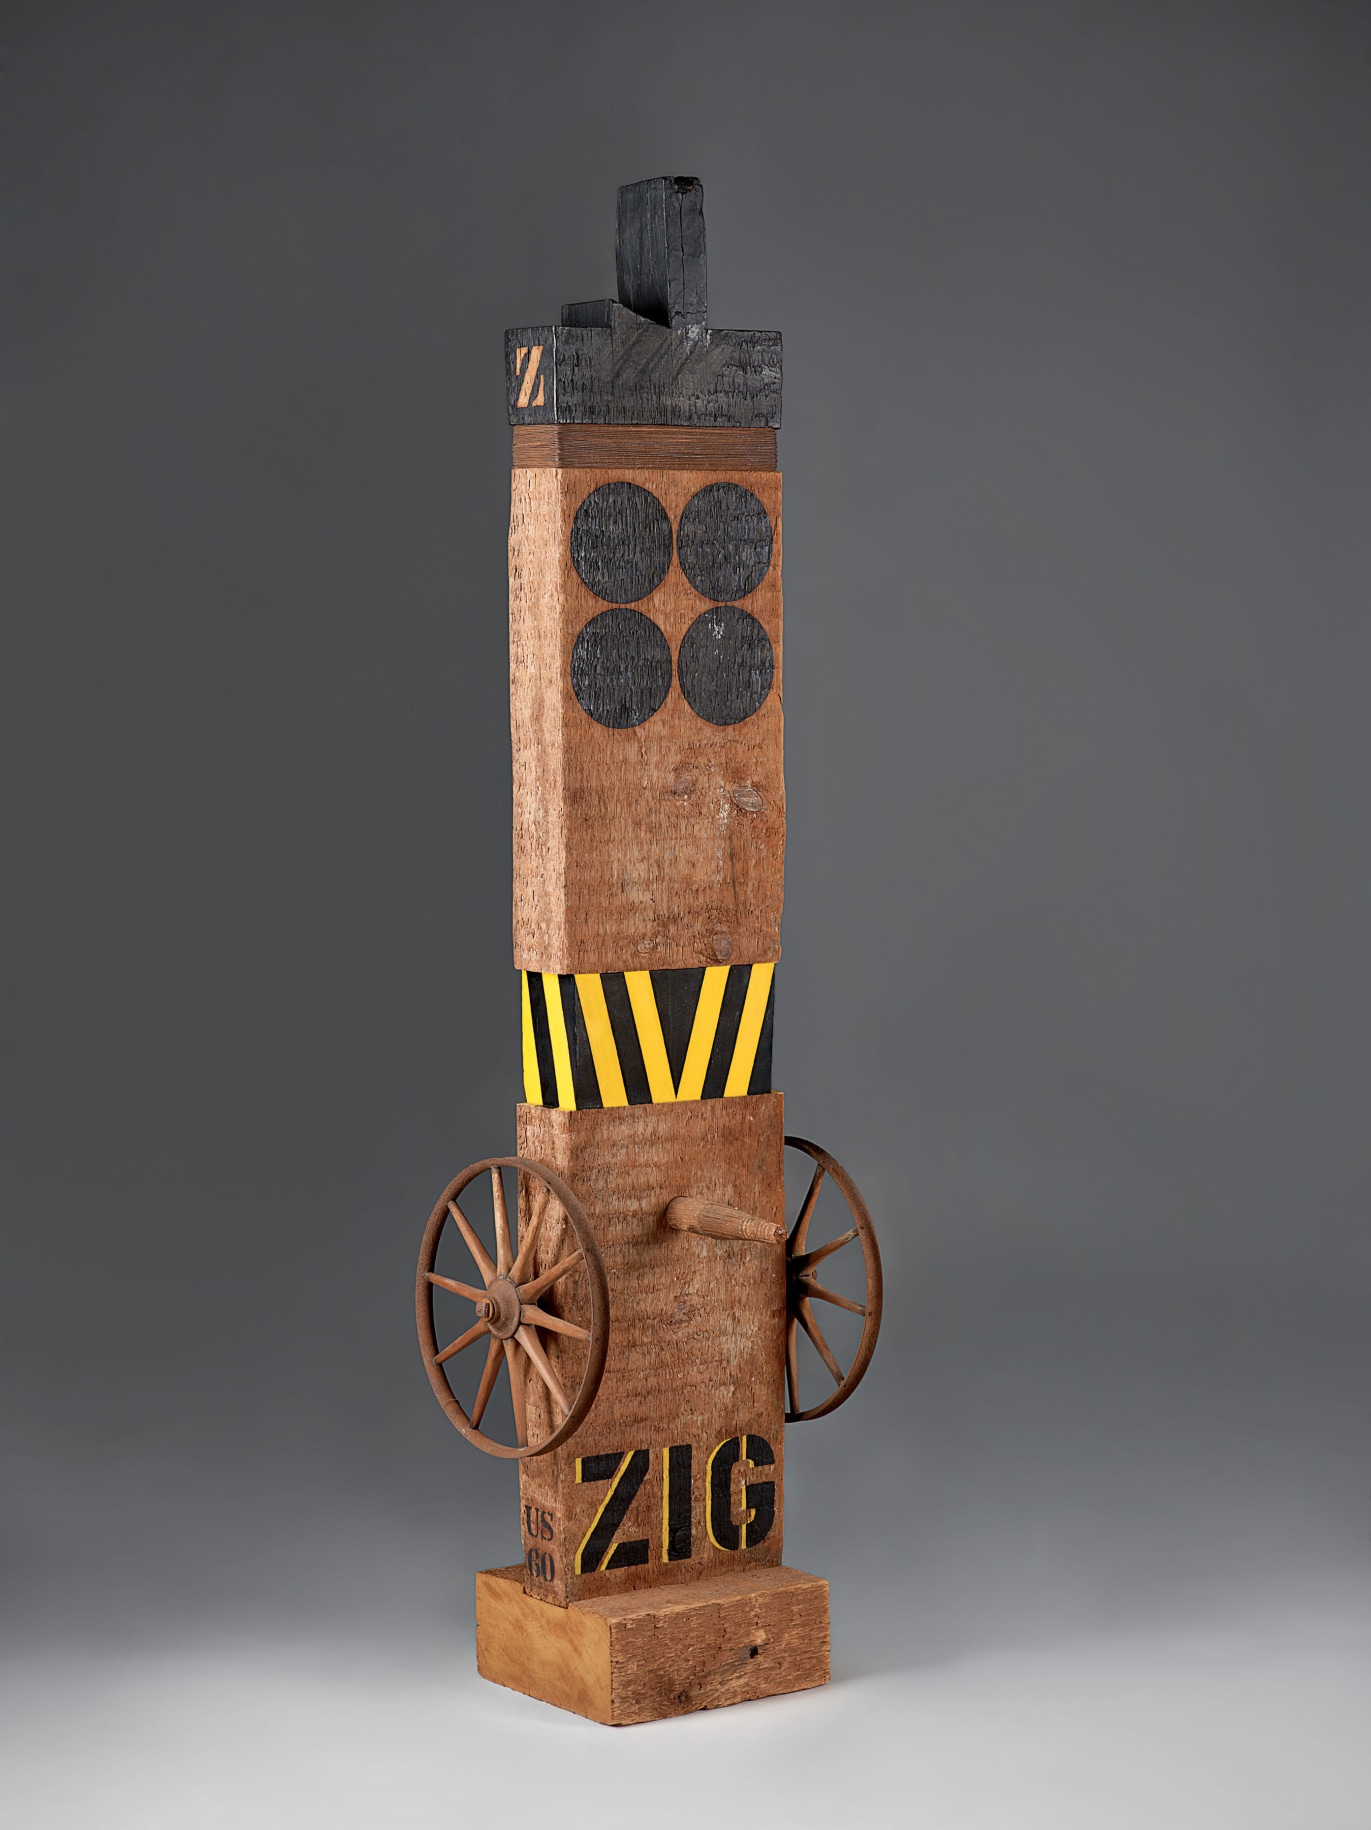 A 65 by 17 3/4 by 16 1/8 inch sculpture consisting of a wooden beam with a haunched tenon on a wooden base. Its title, &quot;Zig,&quot; is painted in black stenciled letters across the bottom of the work. Above the title, affixed on the left and right sides of the sculpture, are metal wheels. A wooden peg has been affixed to the front of the sculpture, in between the top rims of the wheels. A few inches above the peg is a band of yellow and black vertical stripes. The tenon and top of the sculpture have been painted black. Below this is a band of thin metal wires, and below that two rows of two black circles.